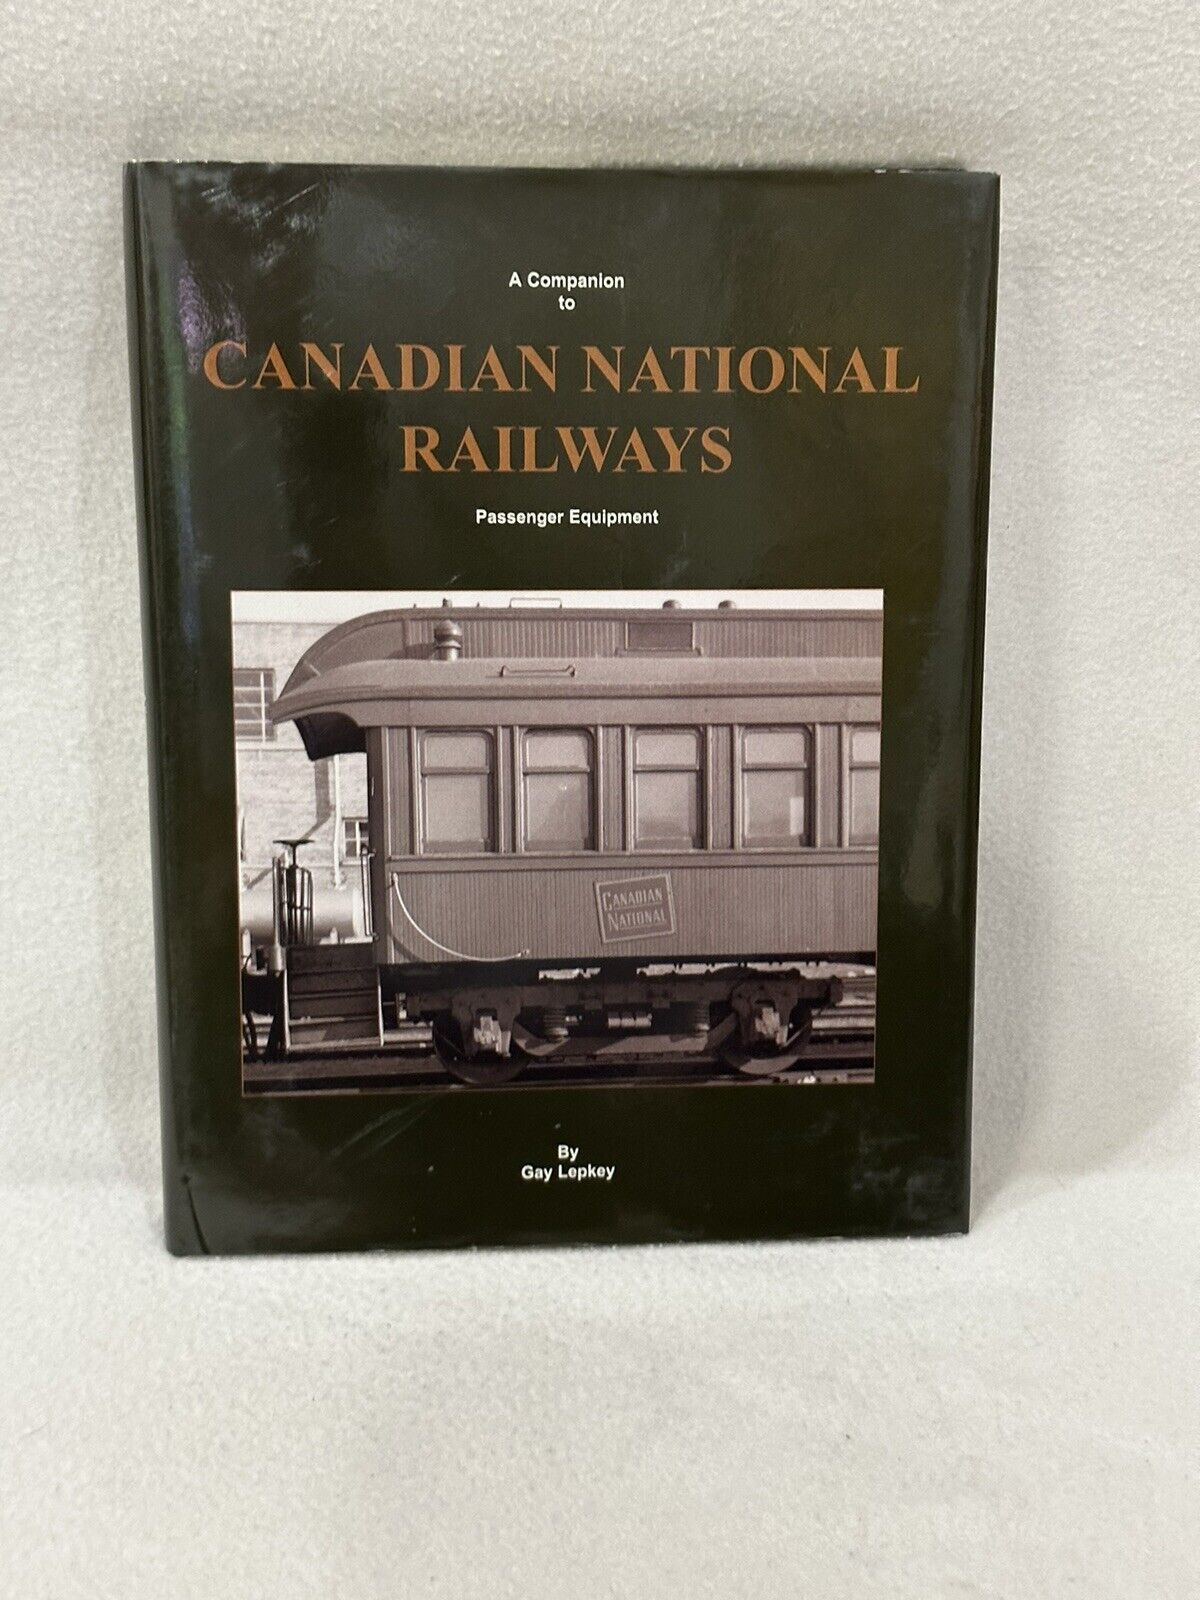 A Companion To Canadian National Railways Passenger Equipment Book by Gay Lepkey